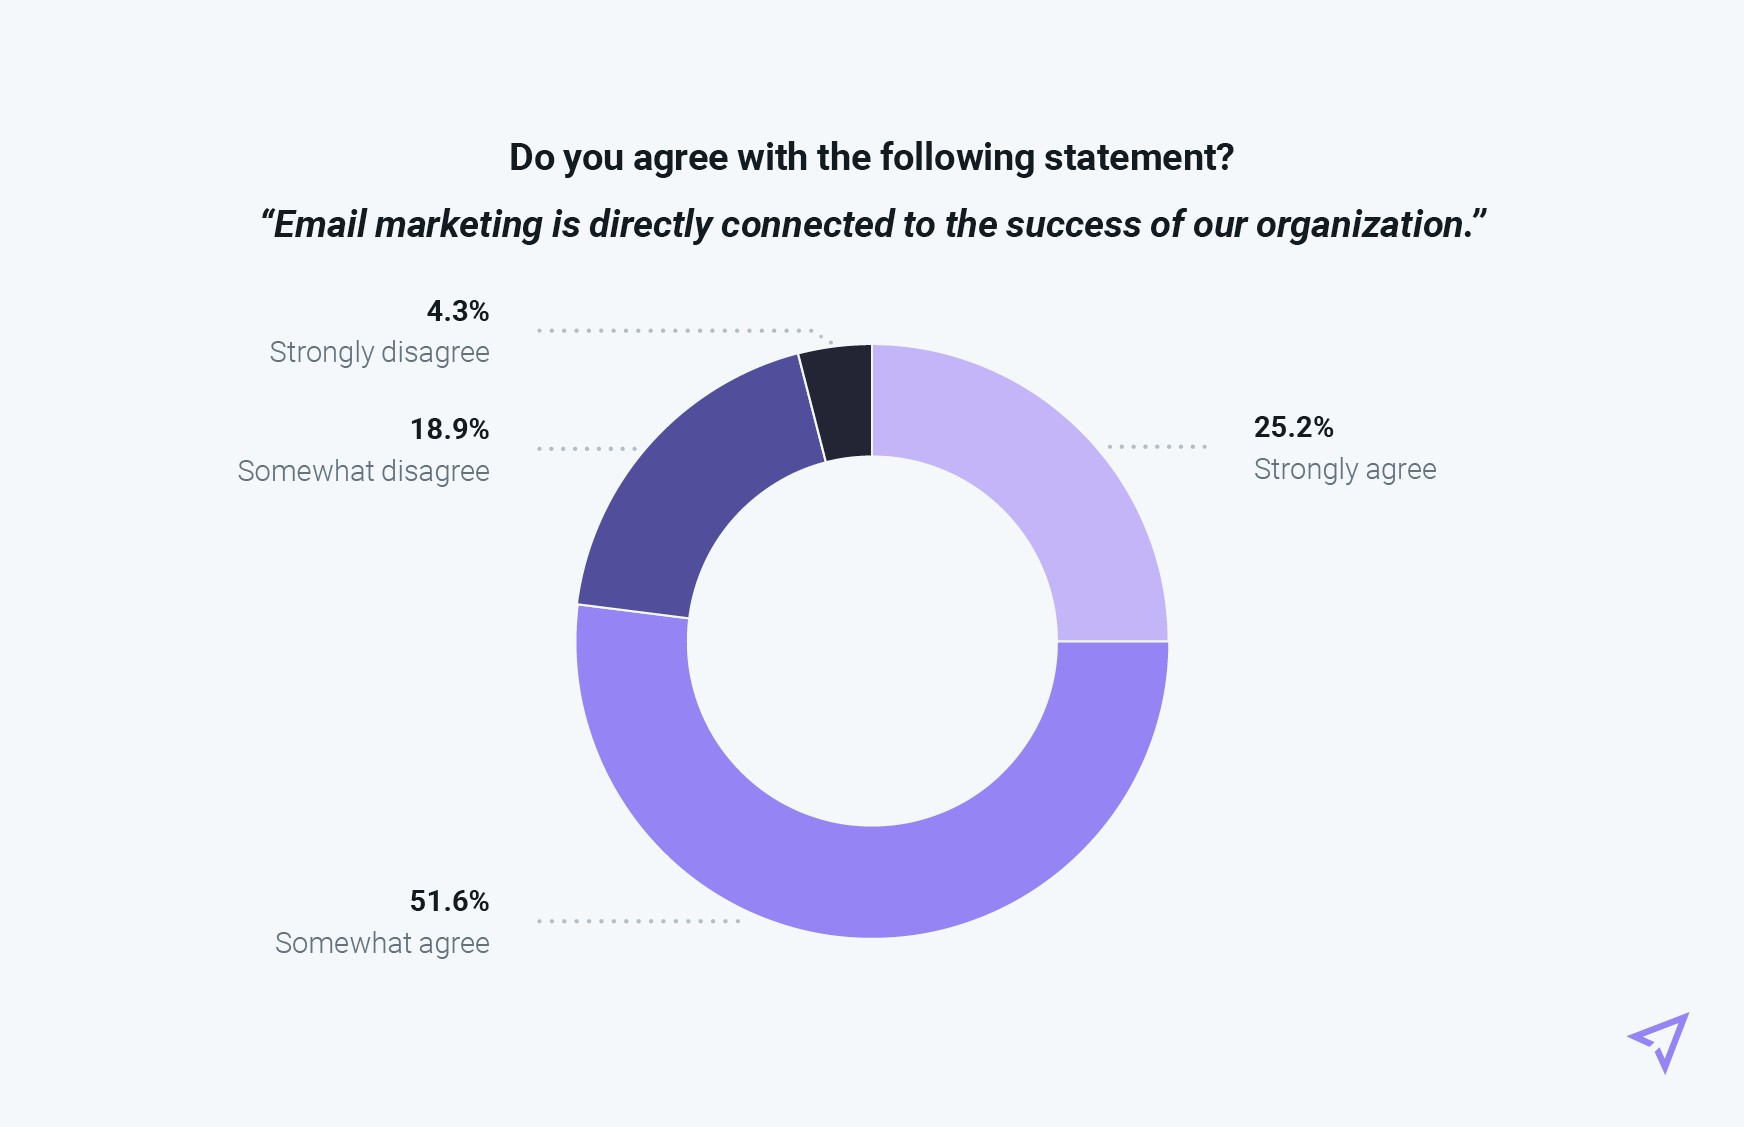 Pie chart showing results on senders' view on email marketing on success of their organization